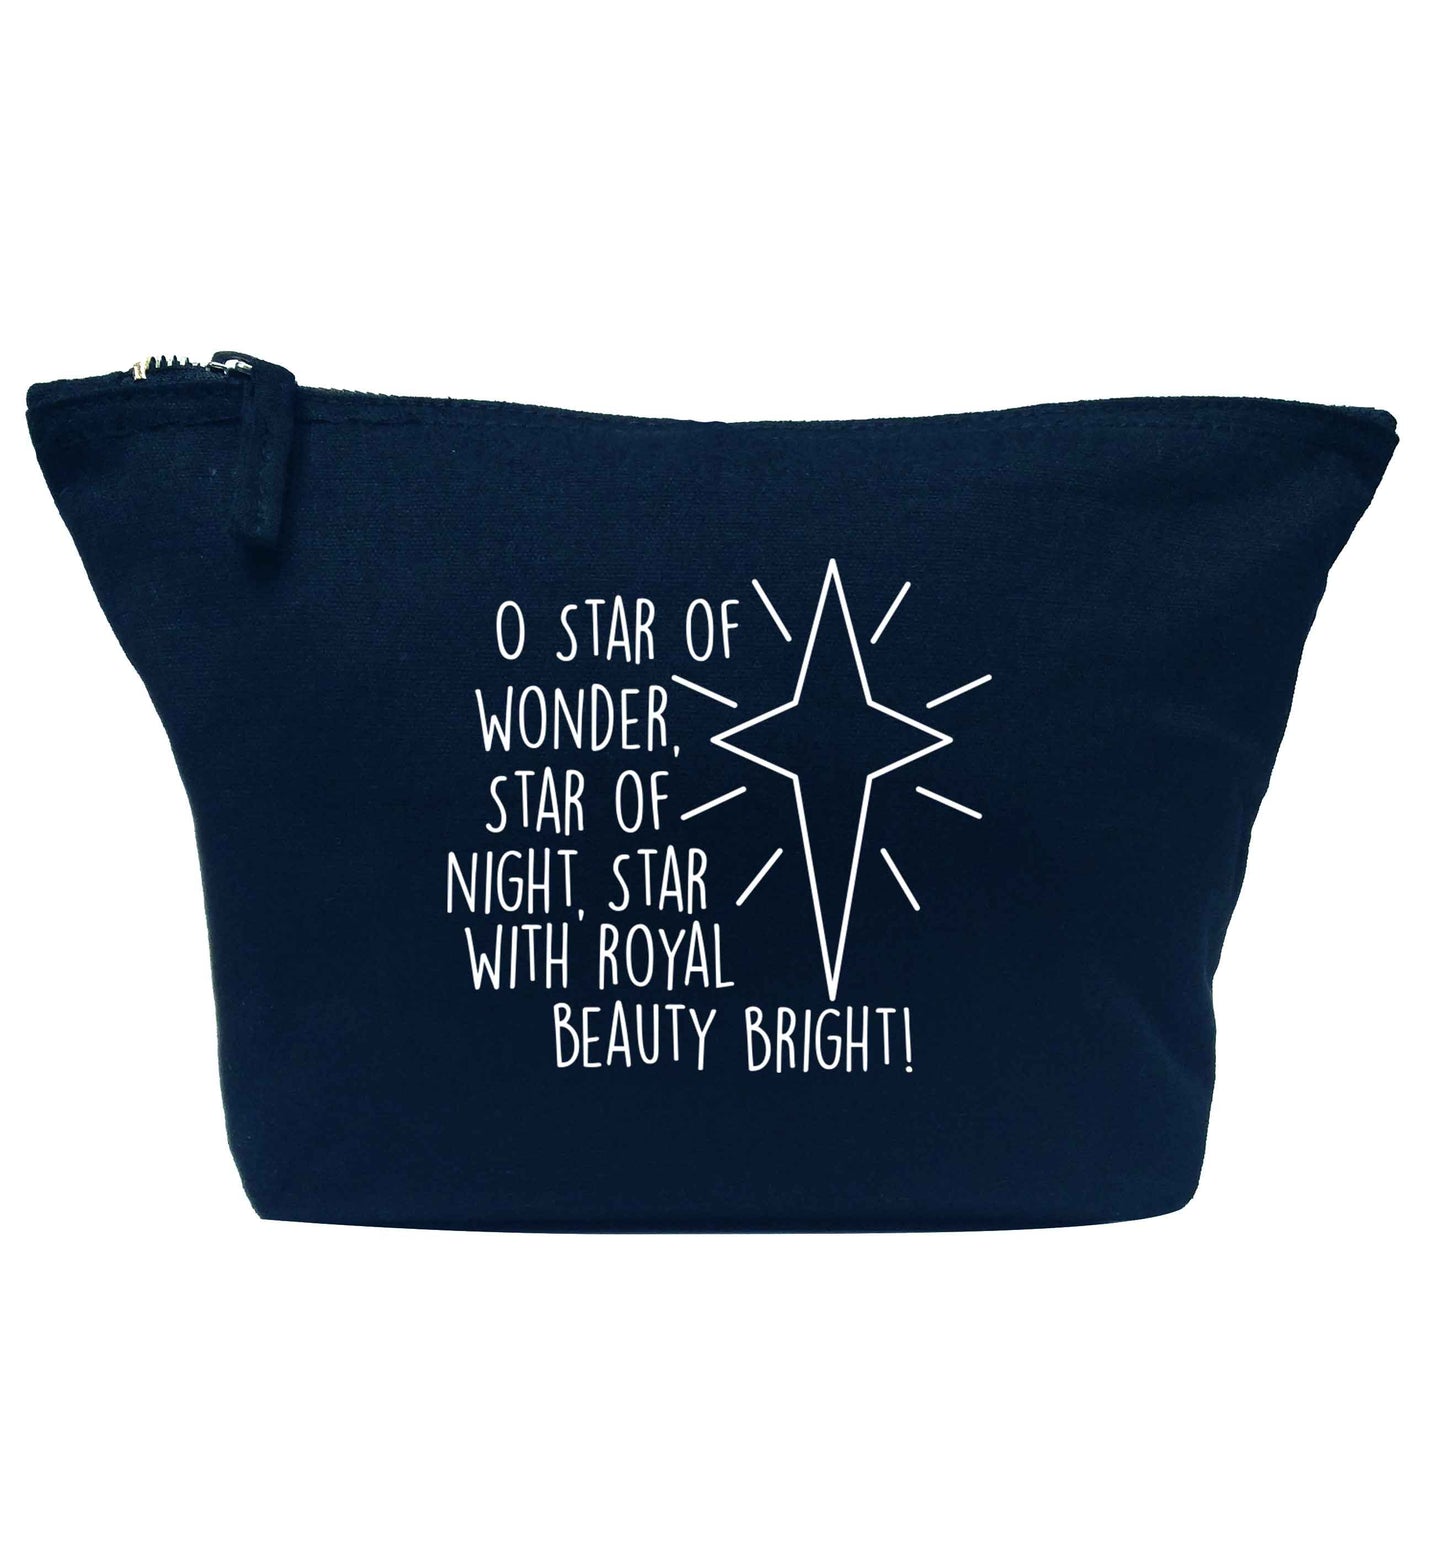 Oh star of wonder star of night, star with royal beauty bright navy makeup bag